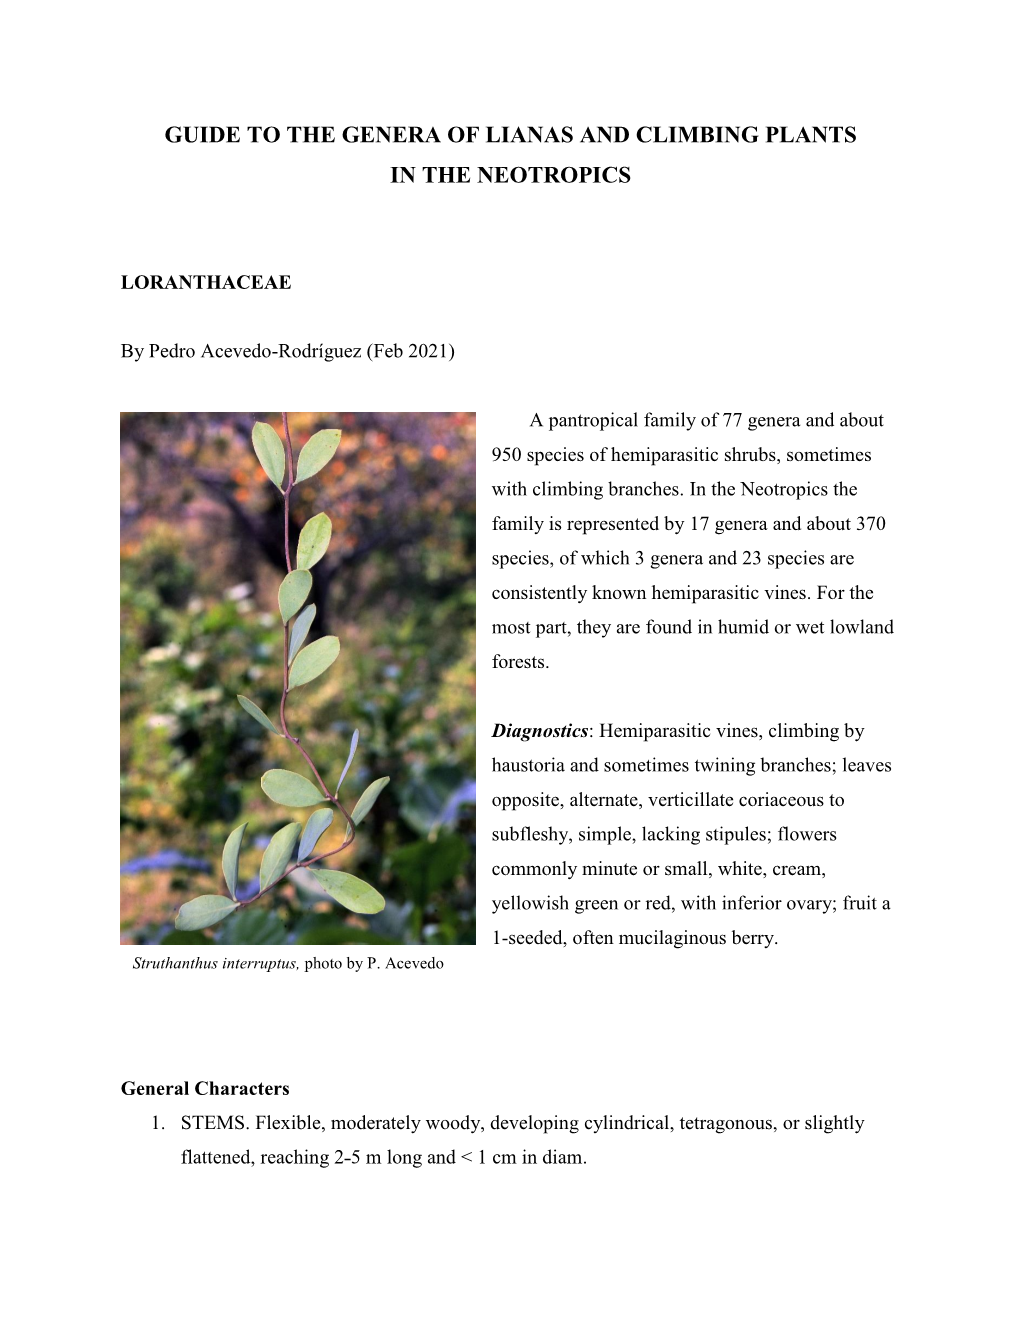 Lianas and Climbing Plants of the Neotropics: Loranthaceae